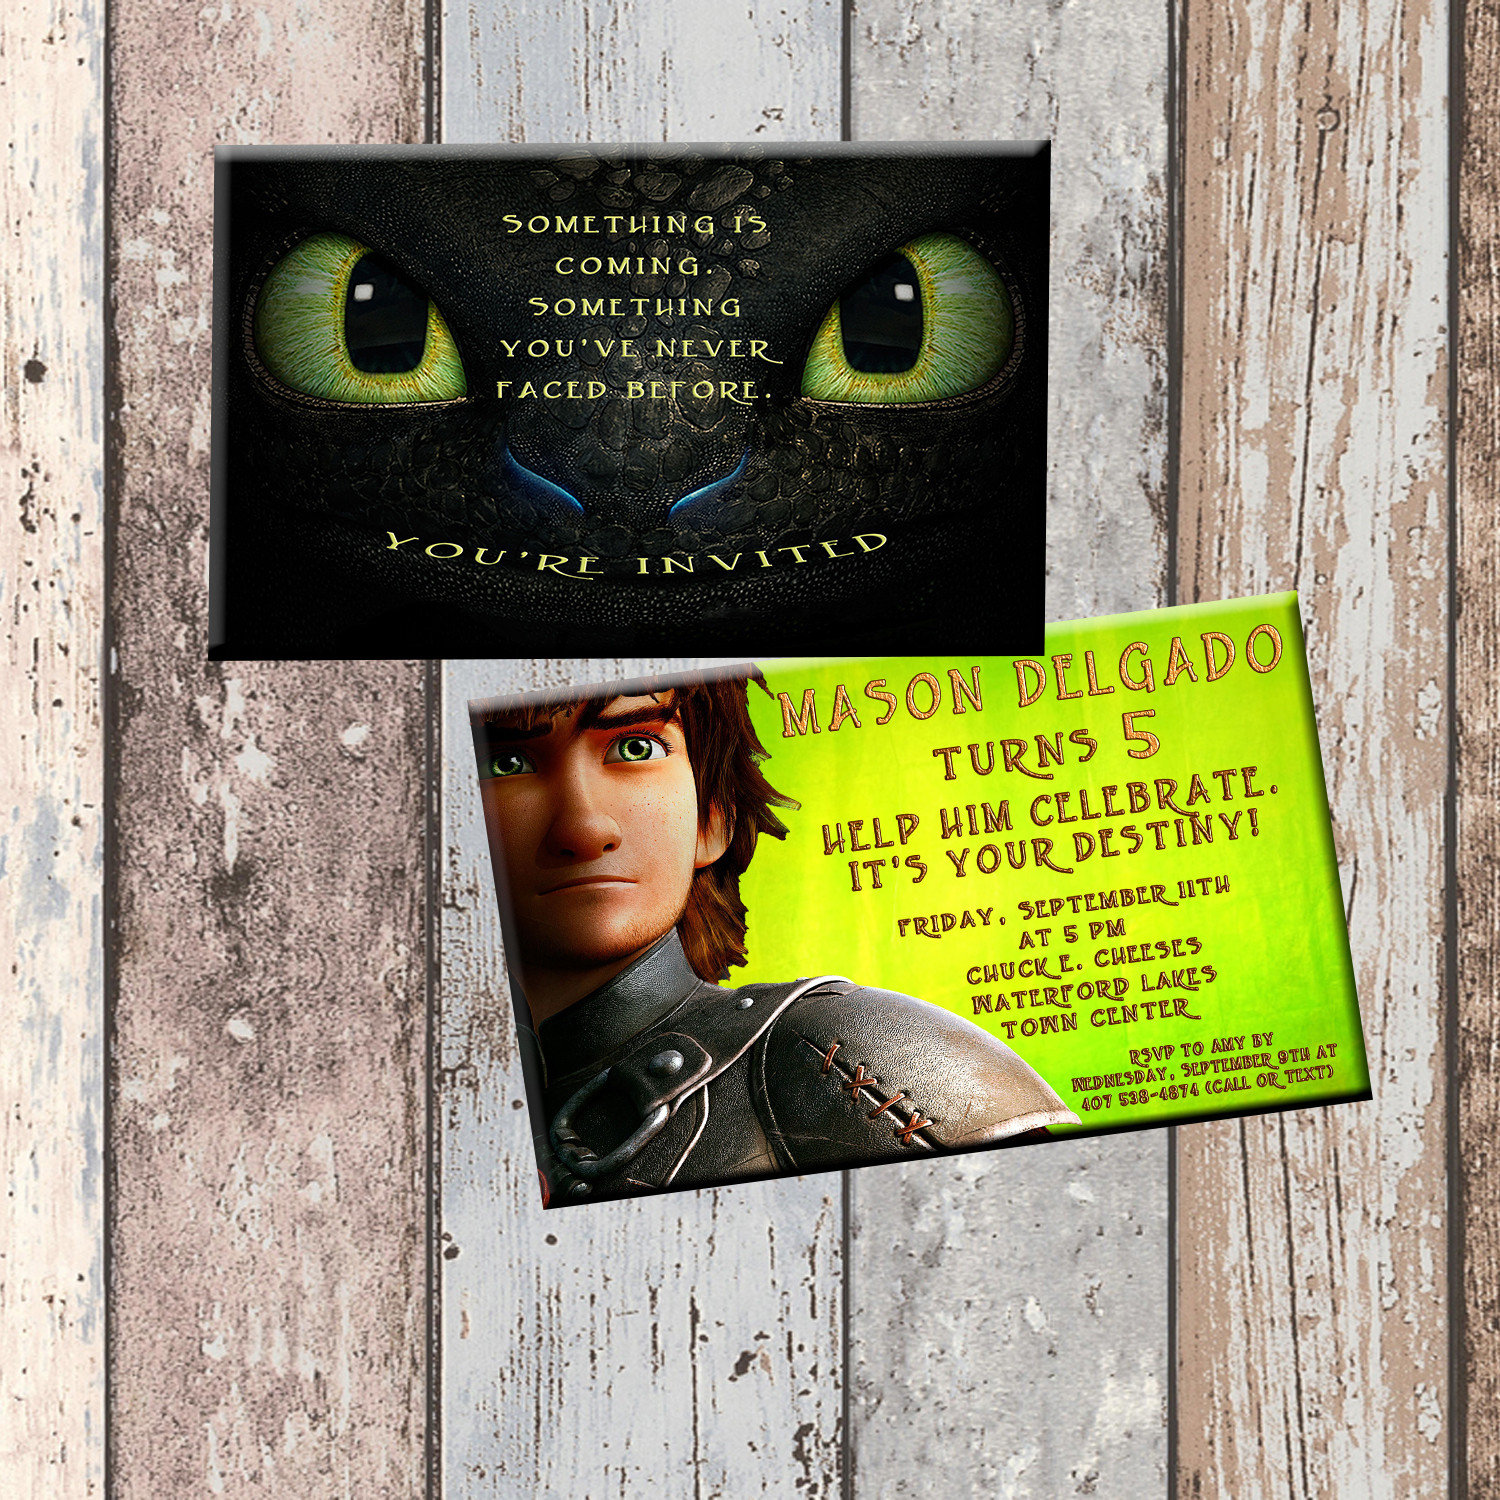 How To Train Your Dragon Birthday Invitations
 Toothless Dragon Personalized Birthday Invitation 2 Sided